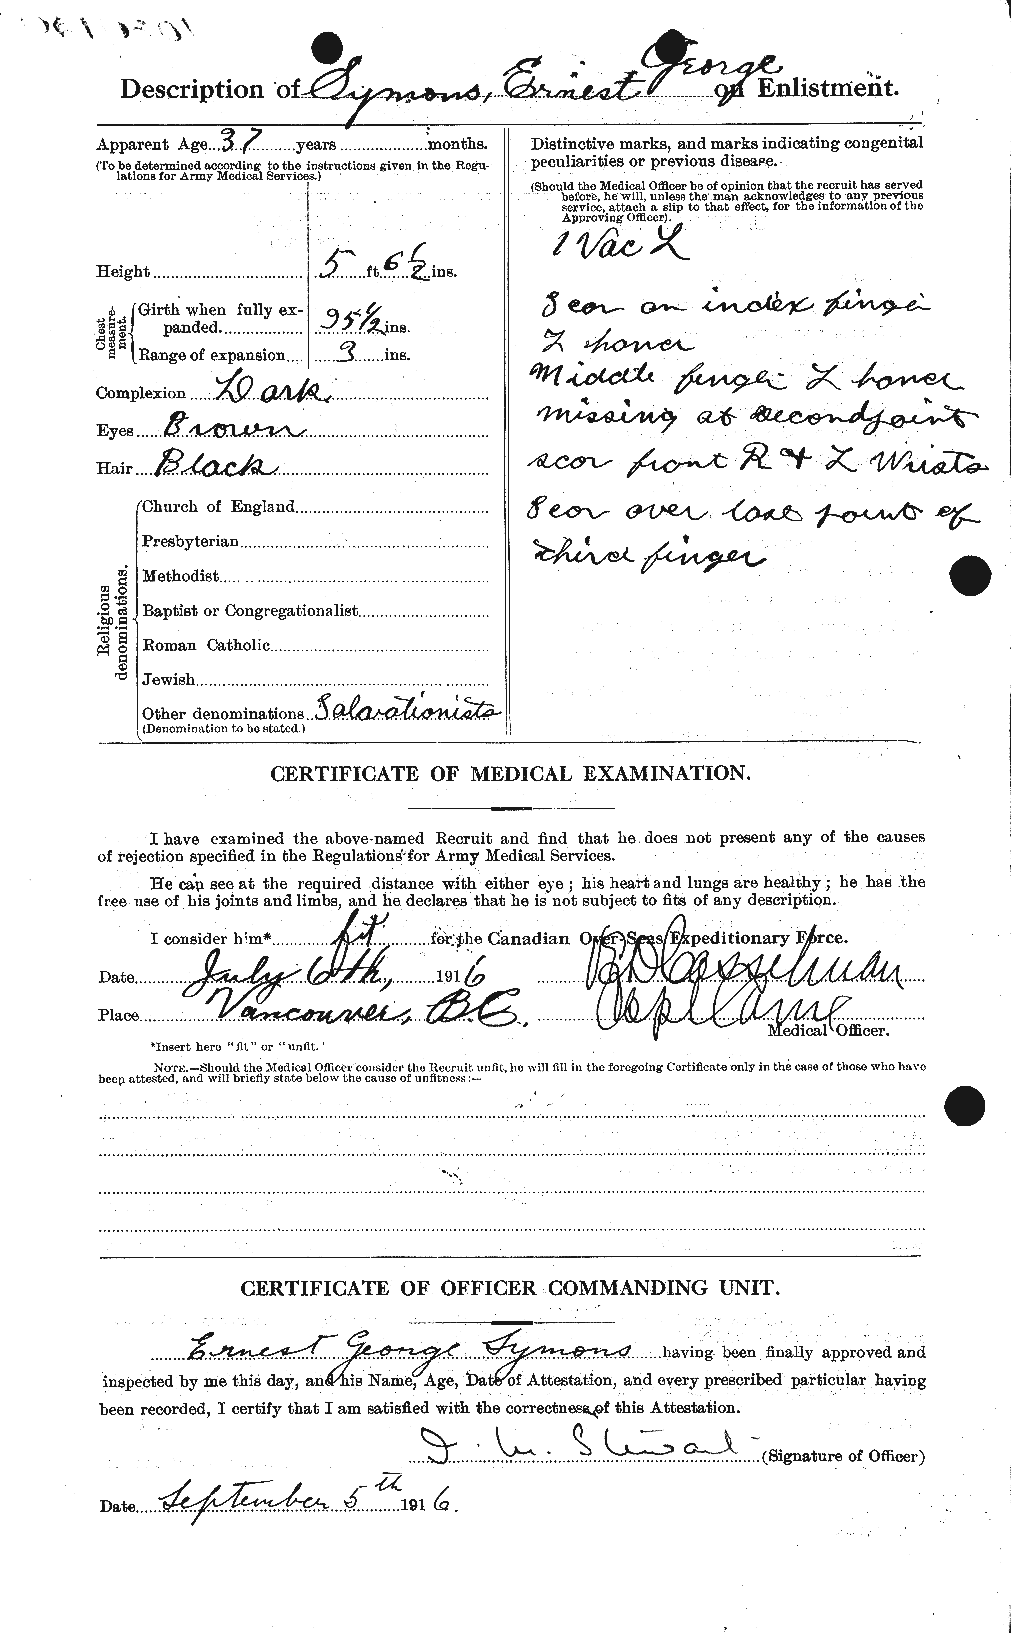 Personnel Records of the First World War - CEF 129170b